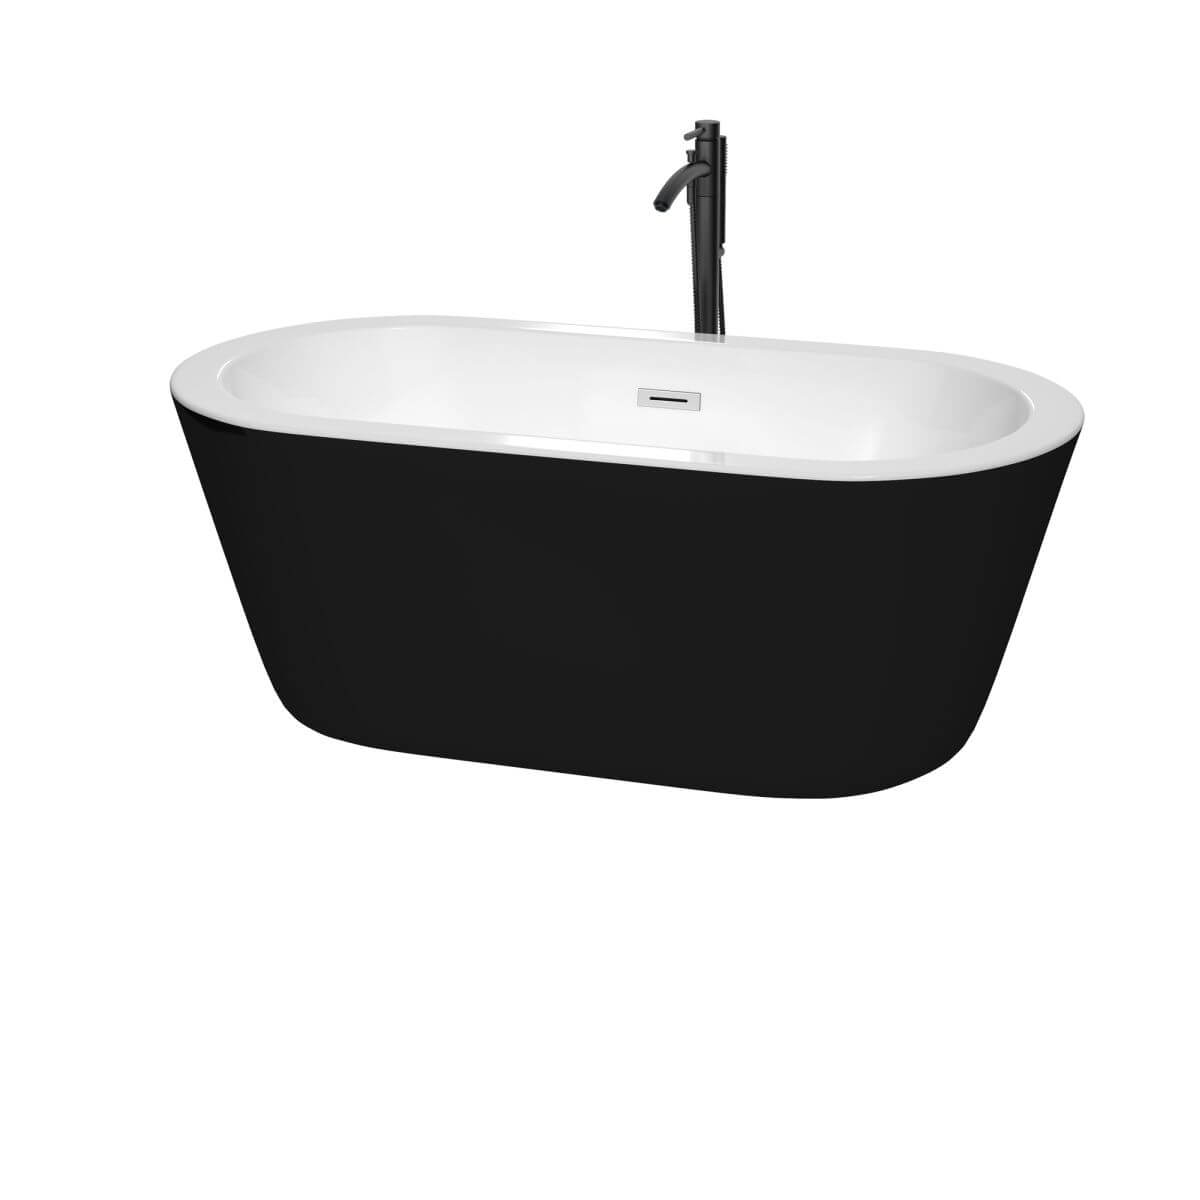 Wyndham Collection Mermaid 60 inch Freestanding Bathtub in Black with White Interior, Polished Chrome Trim and Floor Mounted Faucet in Matte Black - WCOBT100360BKPCATPBK